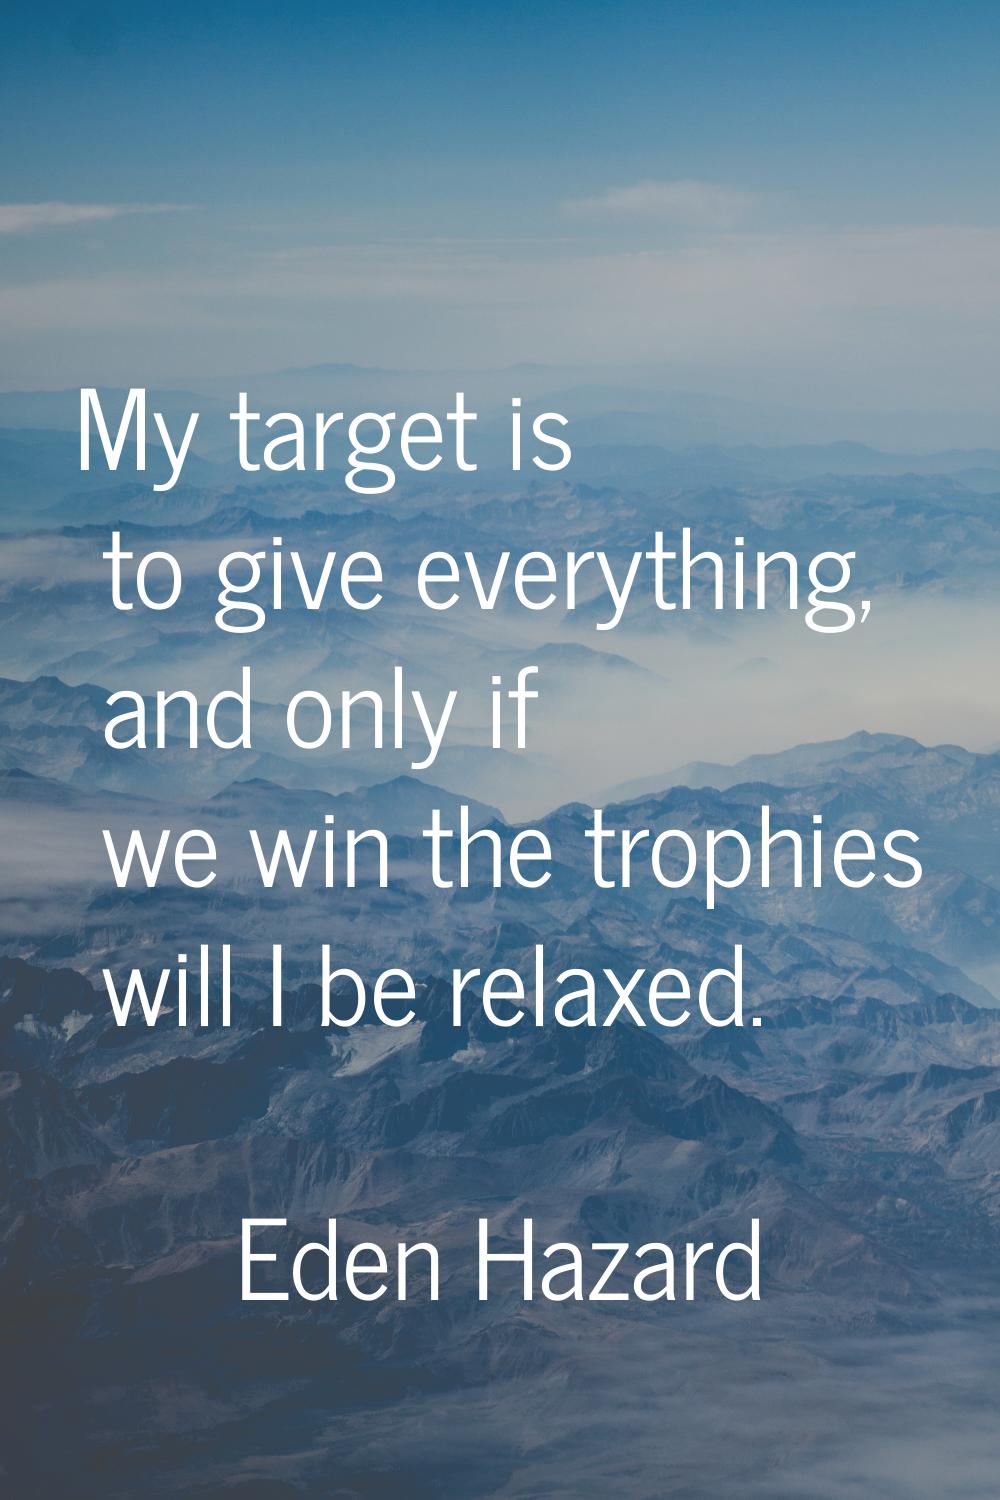 My target is to give everything, and only if we win the trophies will I be relaxed.